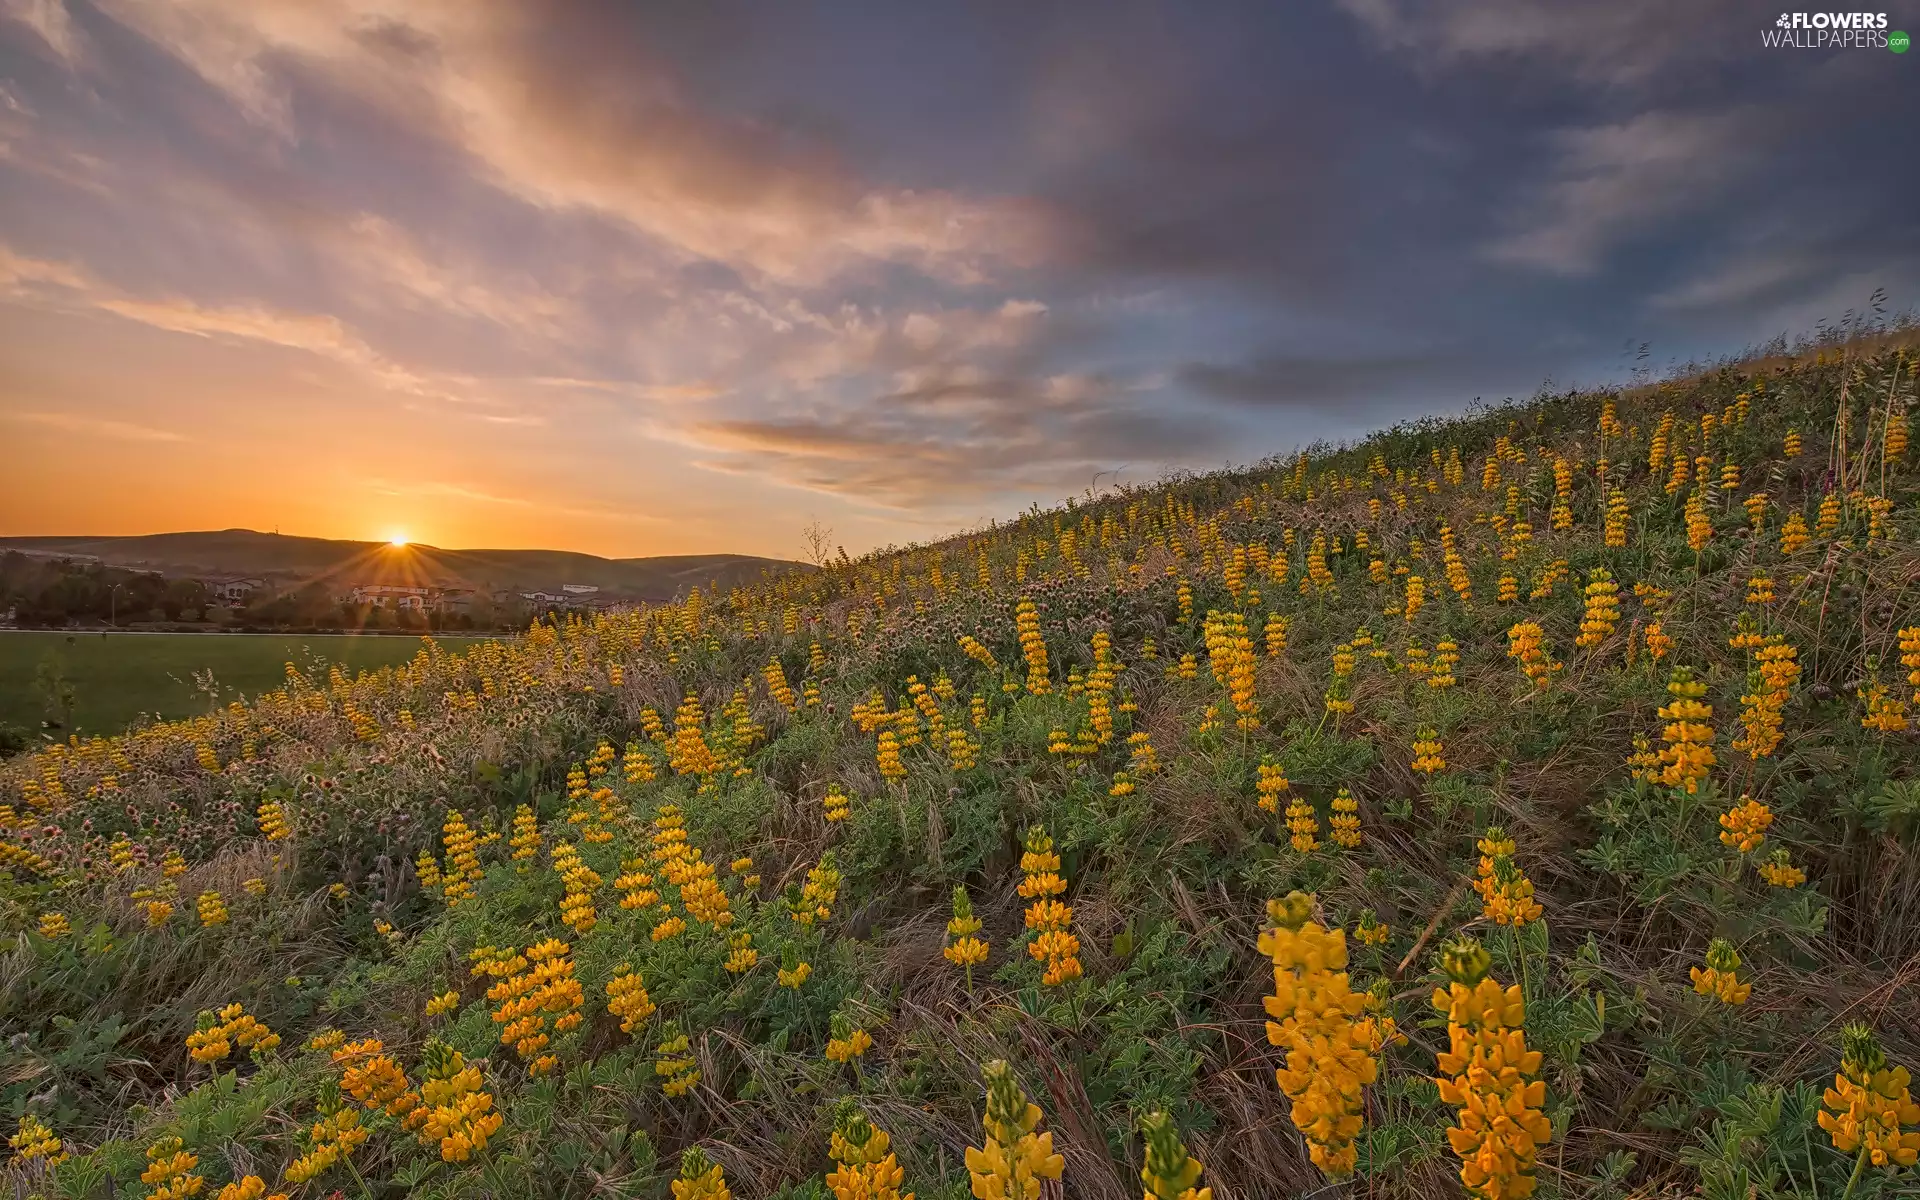 Yellow, lupine, clouds, VEGETATION, Sunrise, Meadow, The Hills, Houses